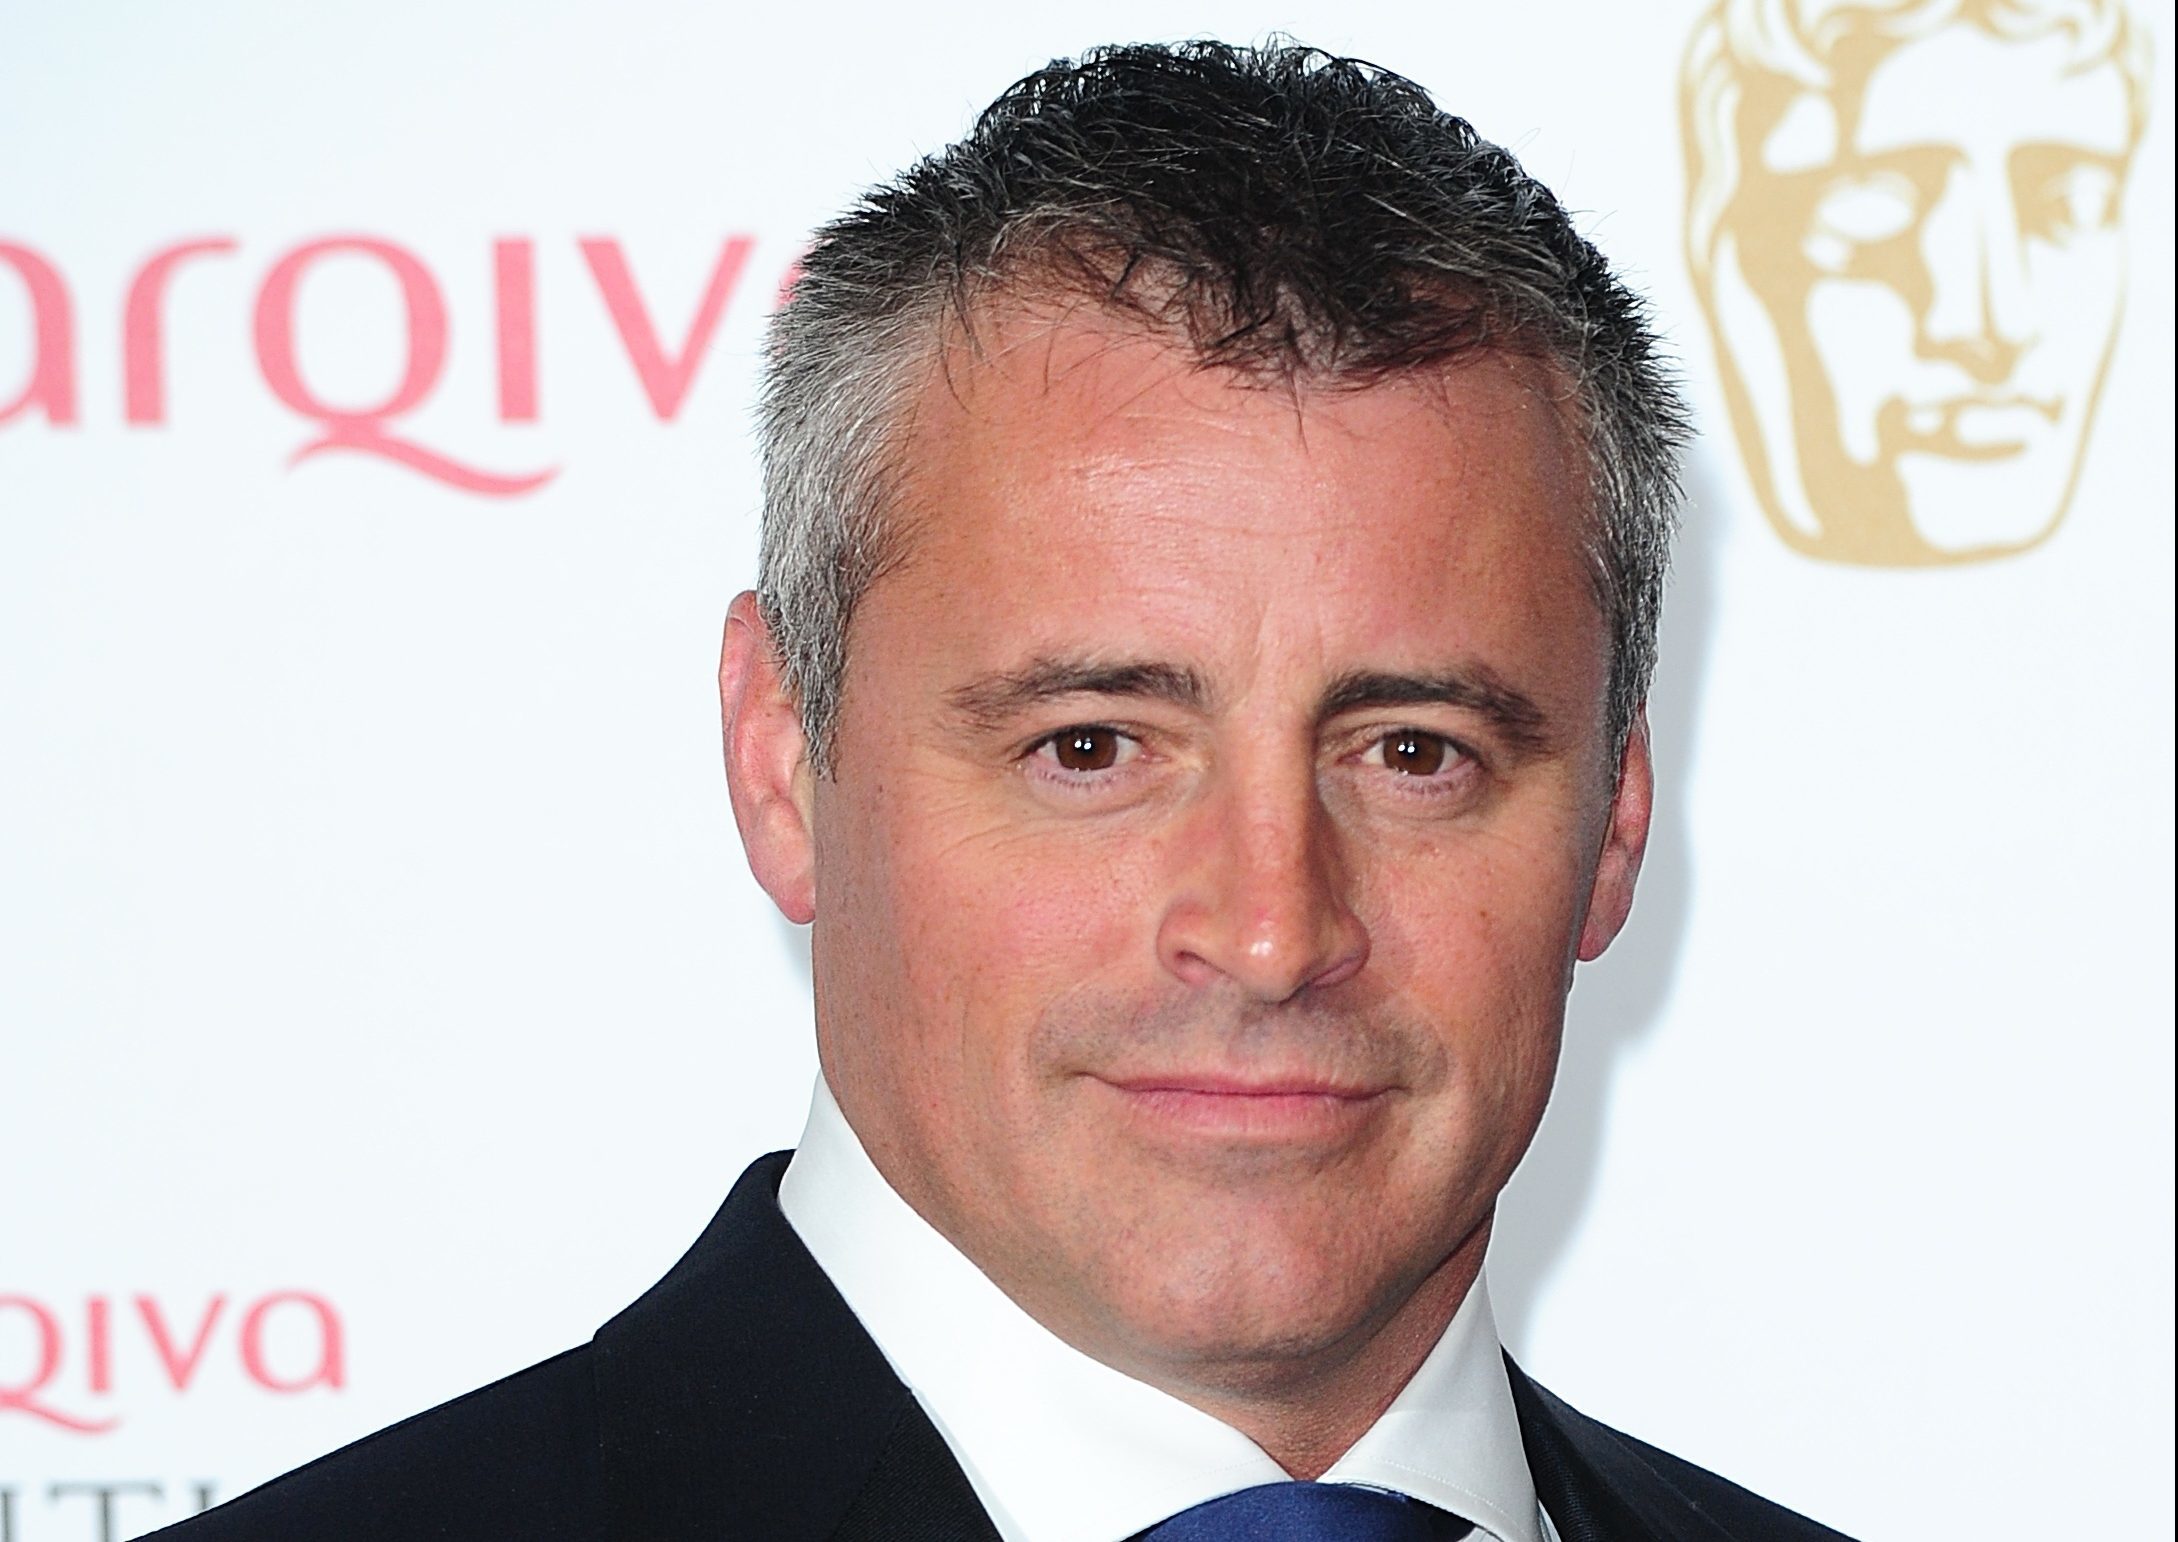 File photo dated 12/05/13 of Friends actor Matt Le Blanc, who is to be one of the new presenters of Top Gear, the BBC said today. PRESS ASSOCIATION Photo. Issue date: Thursday February 4, 2016. See PA story SHOWBIZ TopGear. Photo credit should read: Ian West/PA Wire